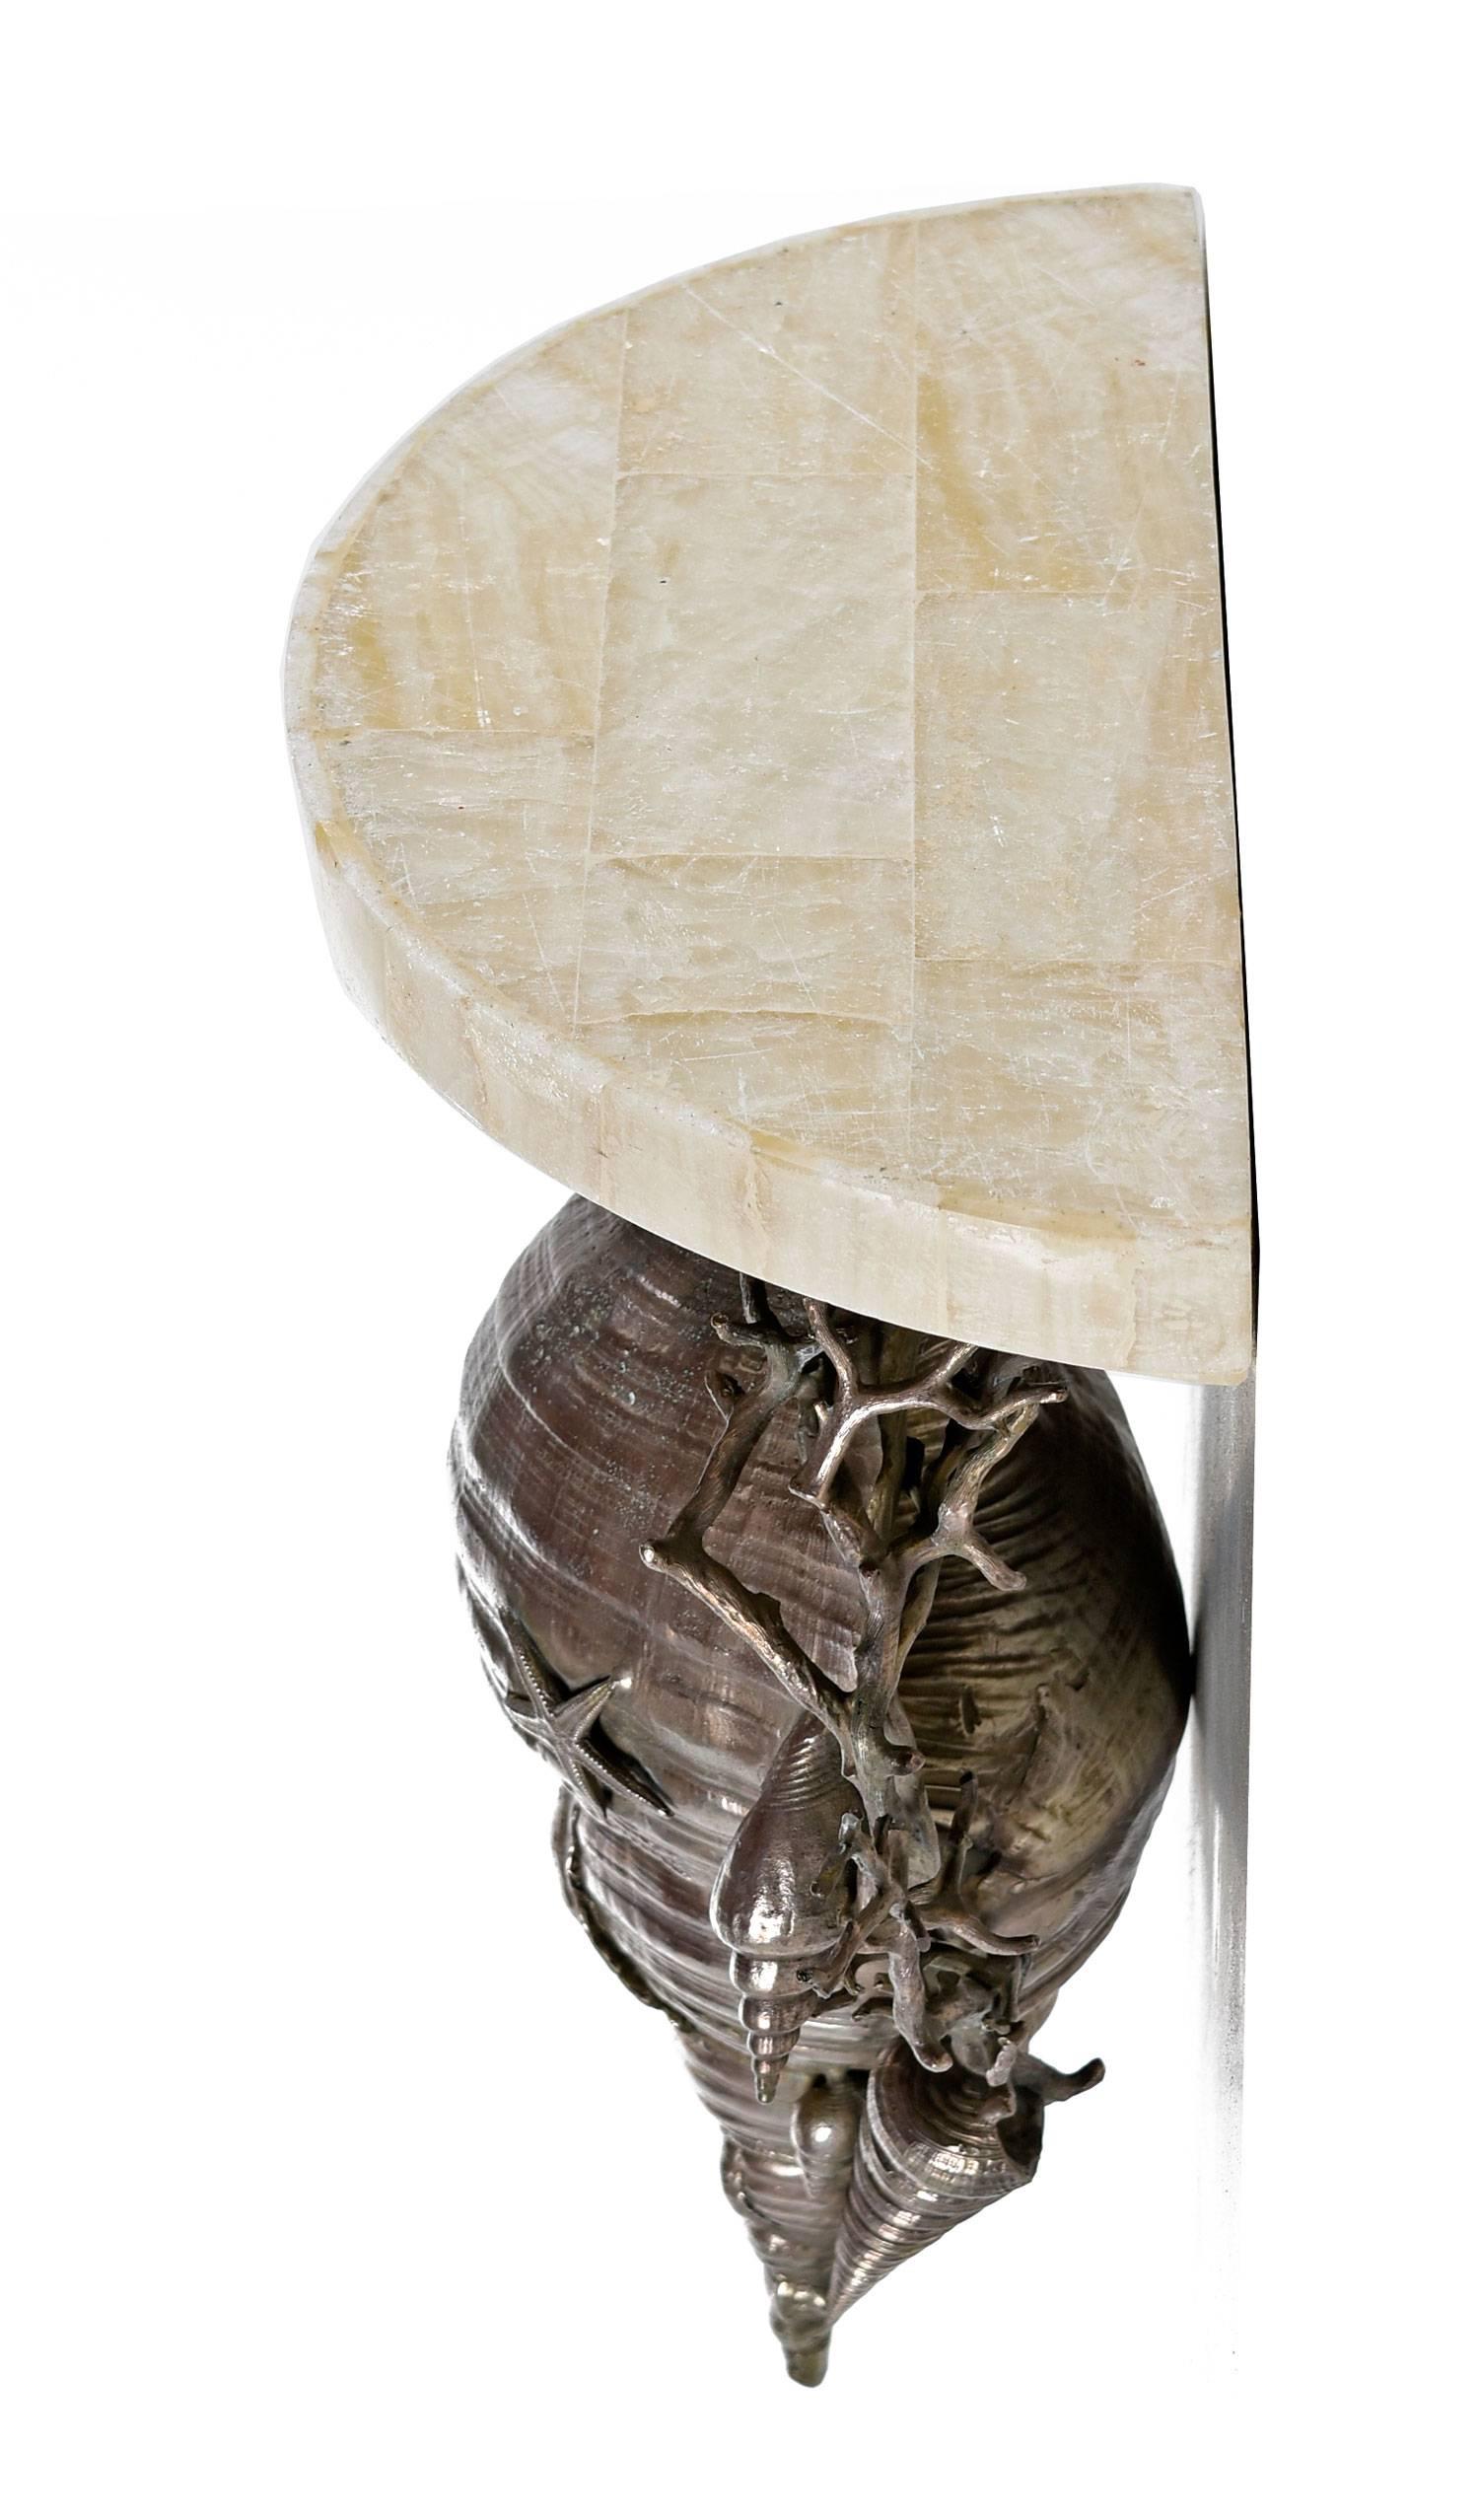 Massive sconce (non-lighted) shelf by Maitland Smith. This decorative conch shell is only one of the many deeply detailed sea scape subjects in this solid, pewter-like metal medium. When mounted to a wall the beveled marble shelf top serves as